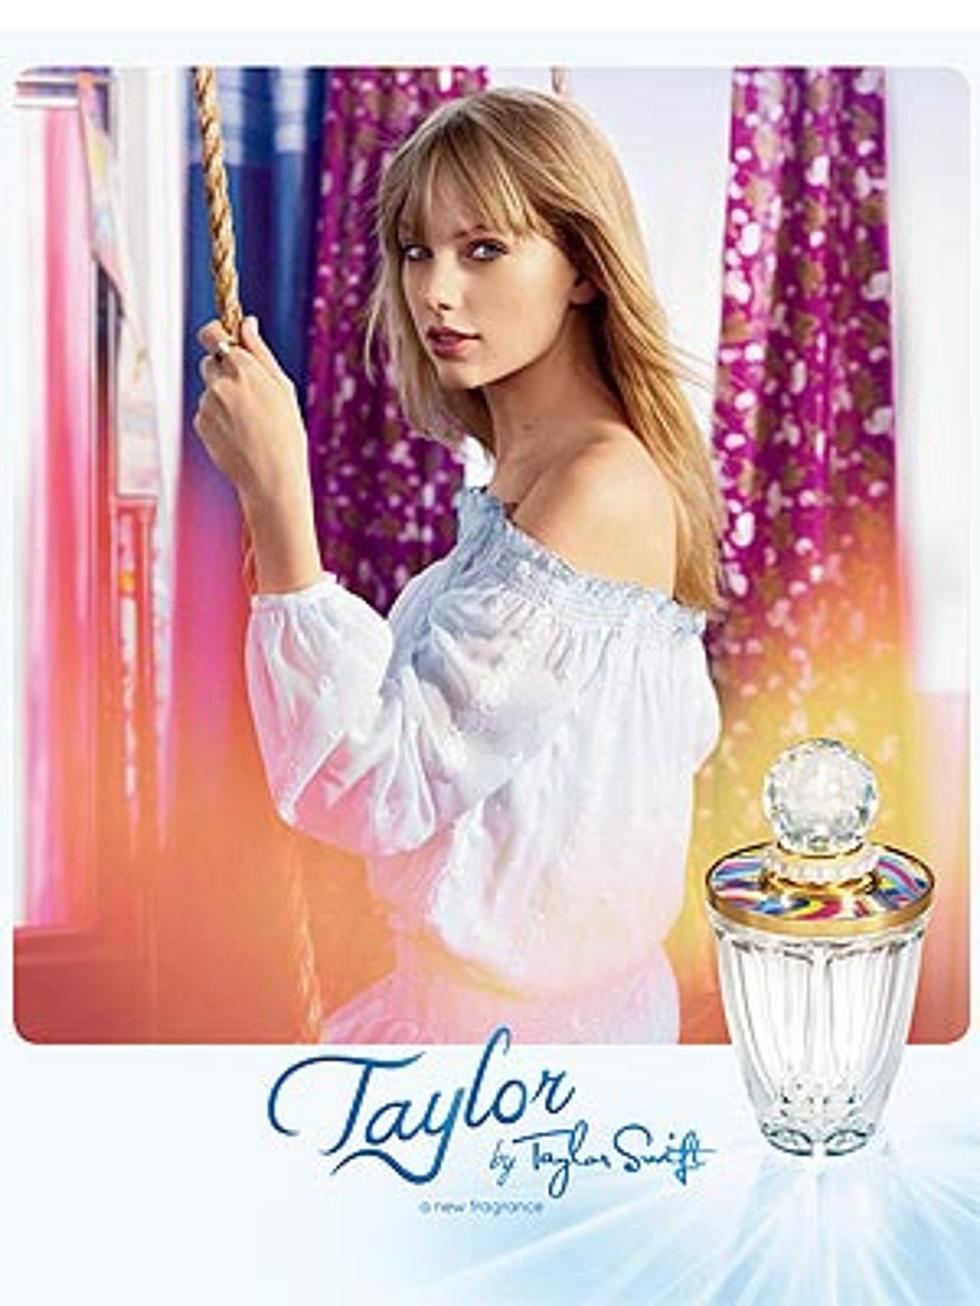 Taylor Swift Launching New Perfume, Taylor by Taylor Swift